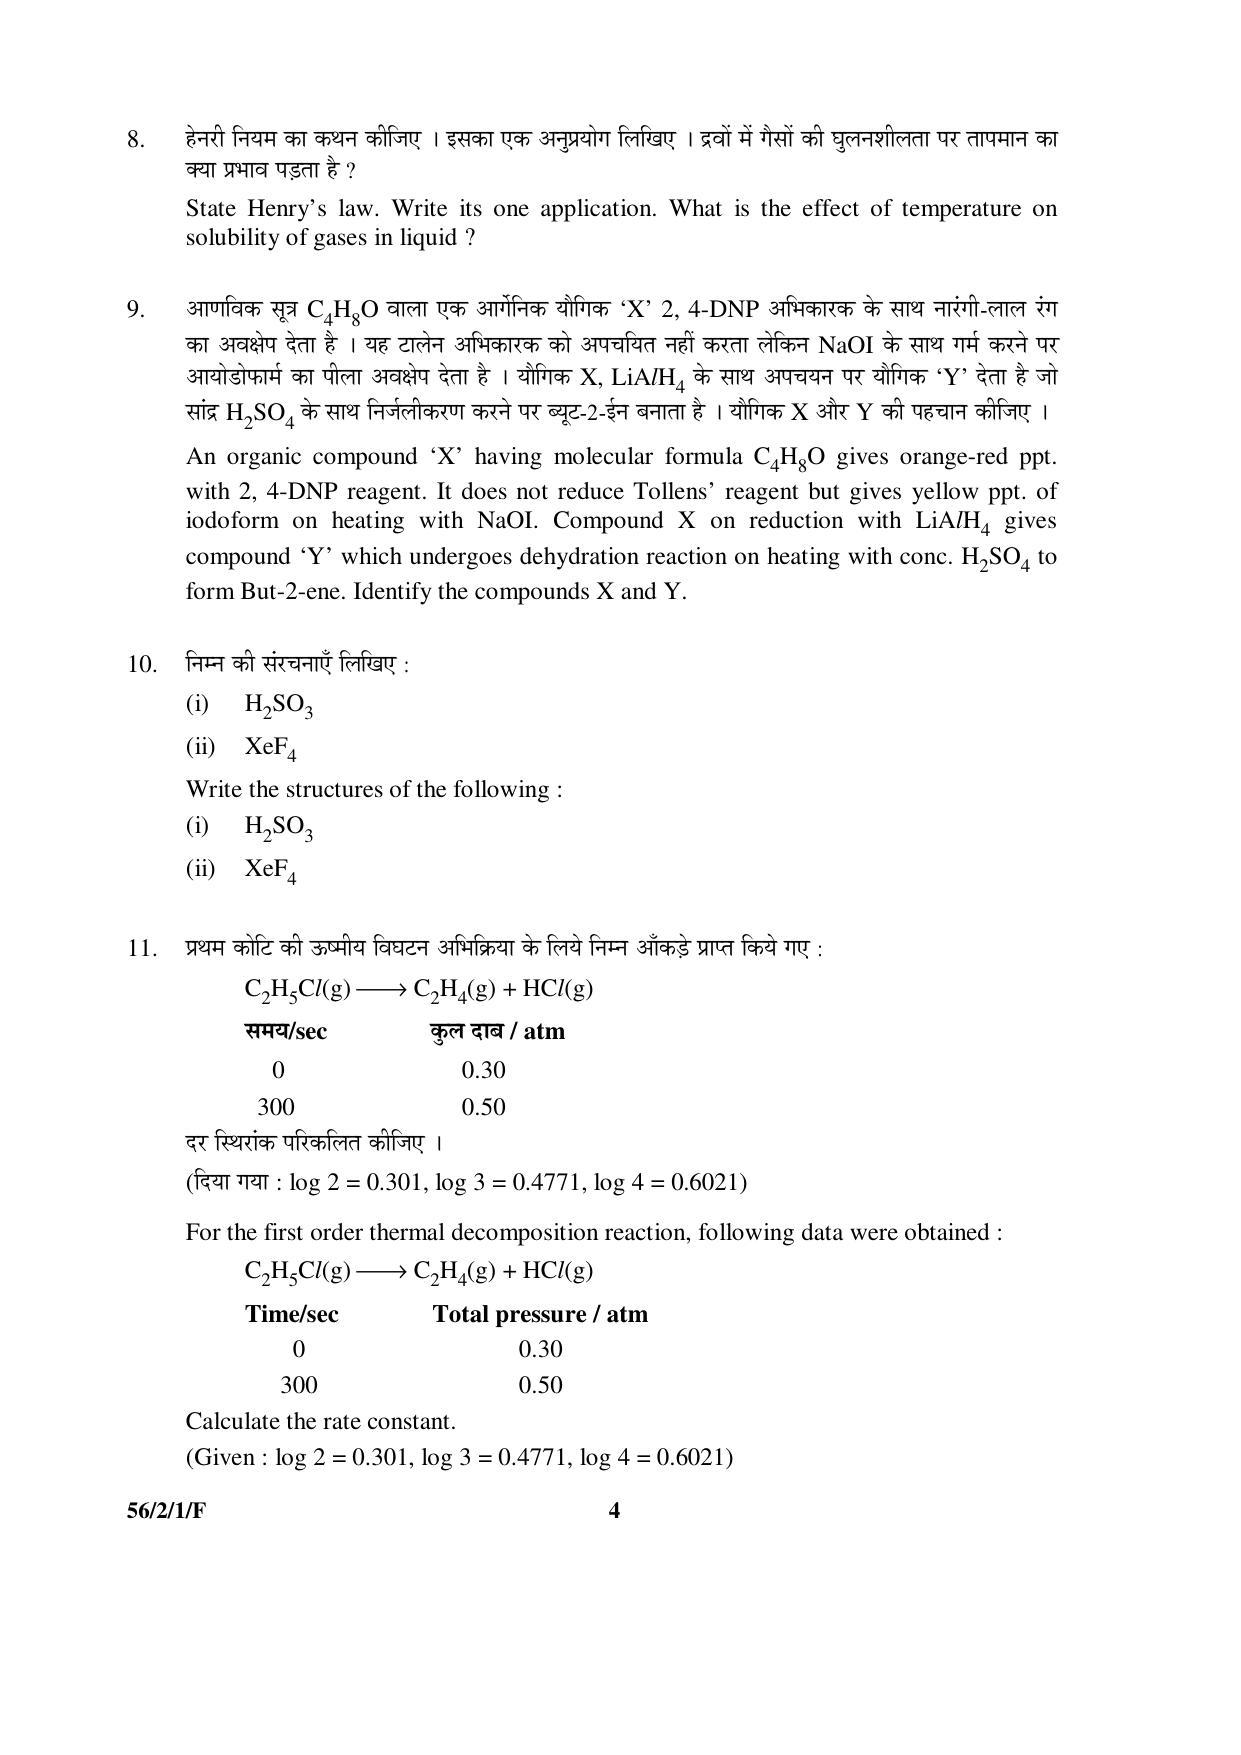 CBSE Class 12 56-2-1-F _Chemistry_ 2016 Question Paper - Page 4